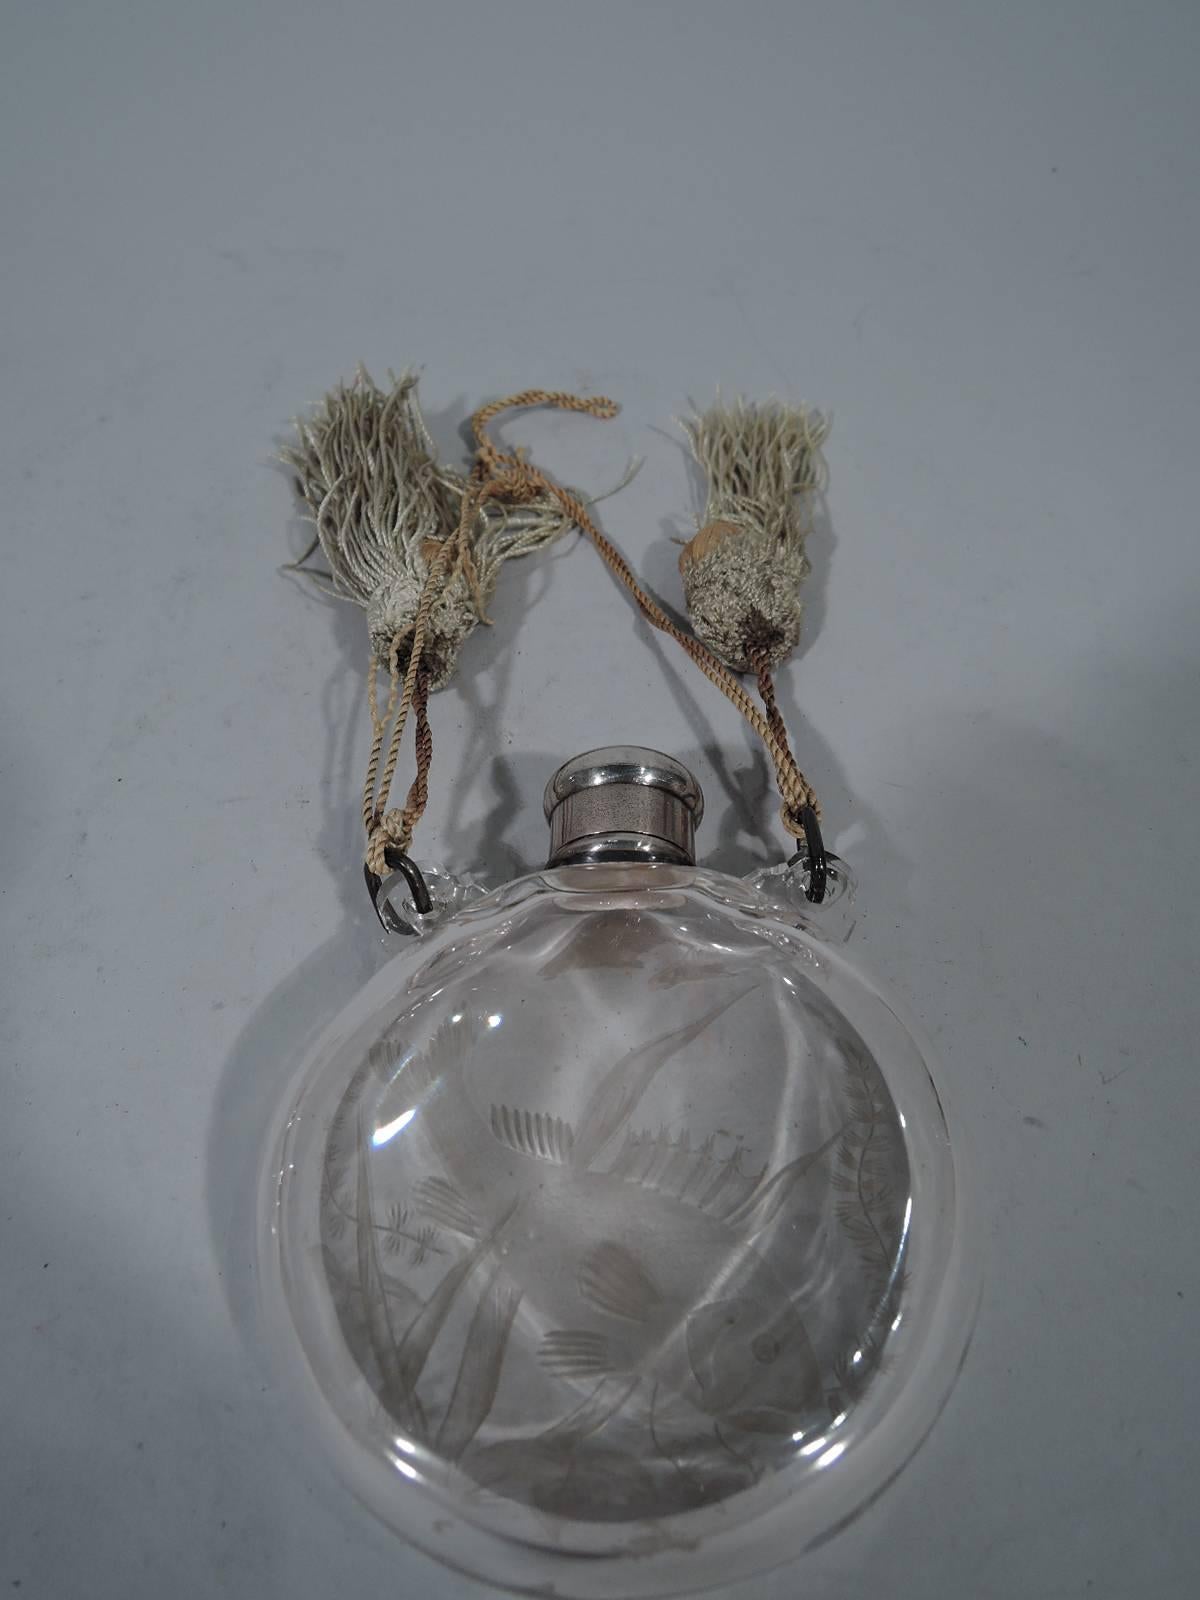 Japonesque sterling silver and glass perfume. Made by Tiffany & Co. in New York, circa 1878. Circular with flat sides and short neck. On front intaglio-cut fish (coy) and sea grasses. Threaded bun cover engraved with interlaced script monogram.